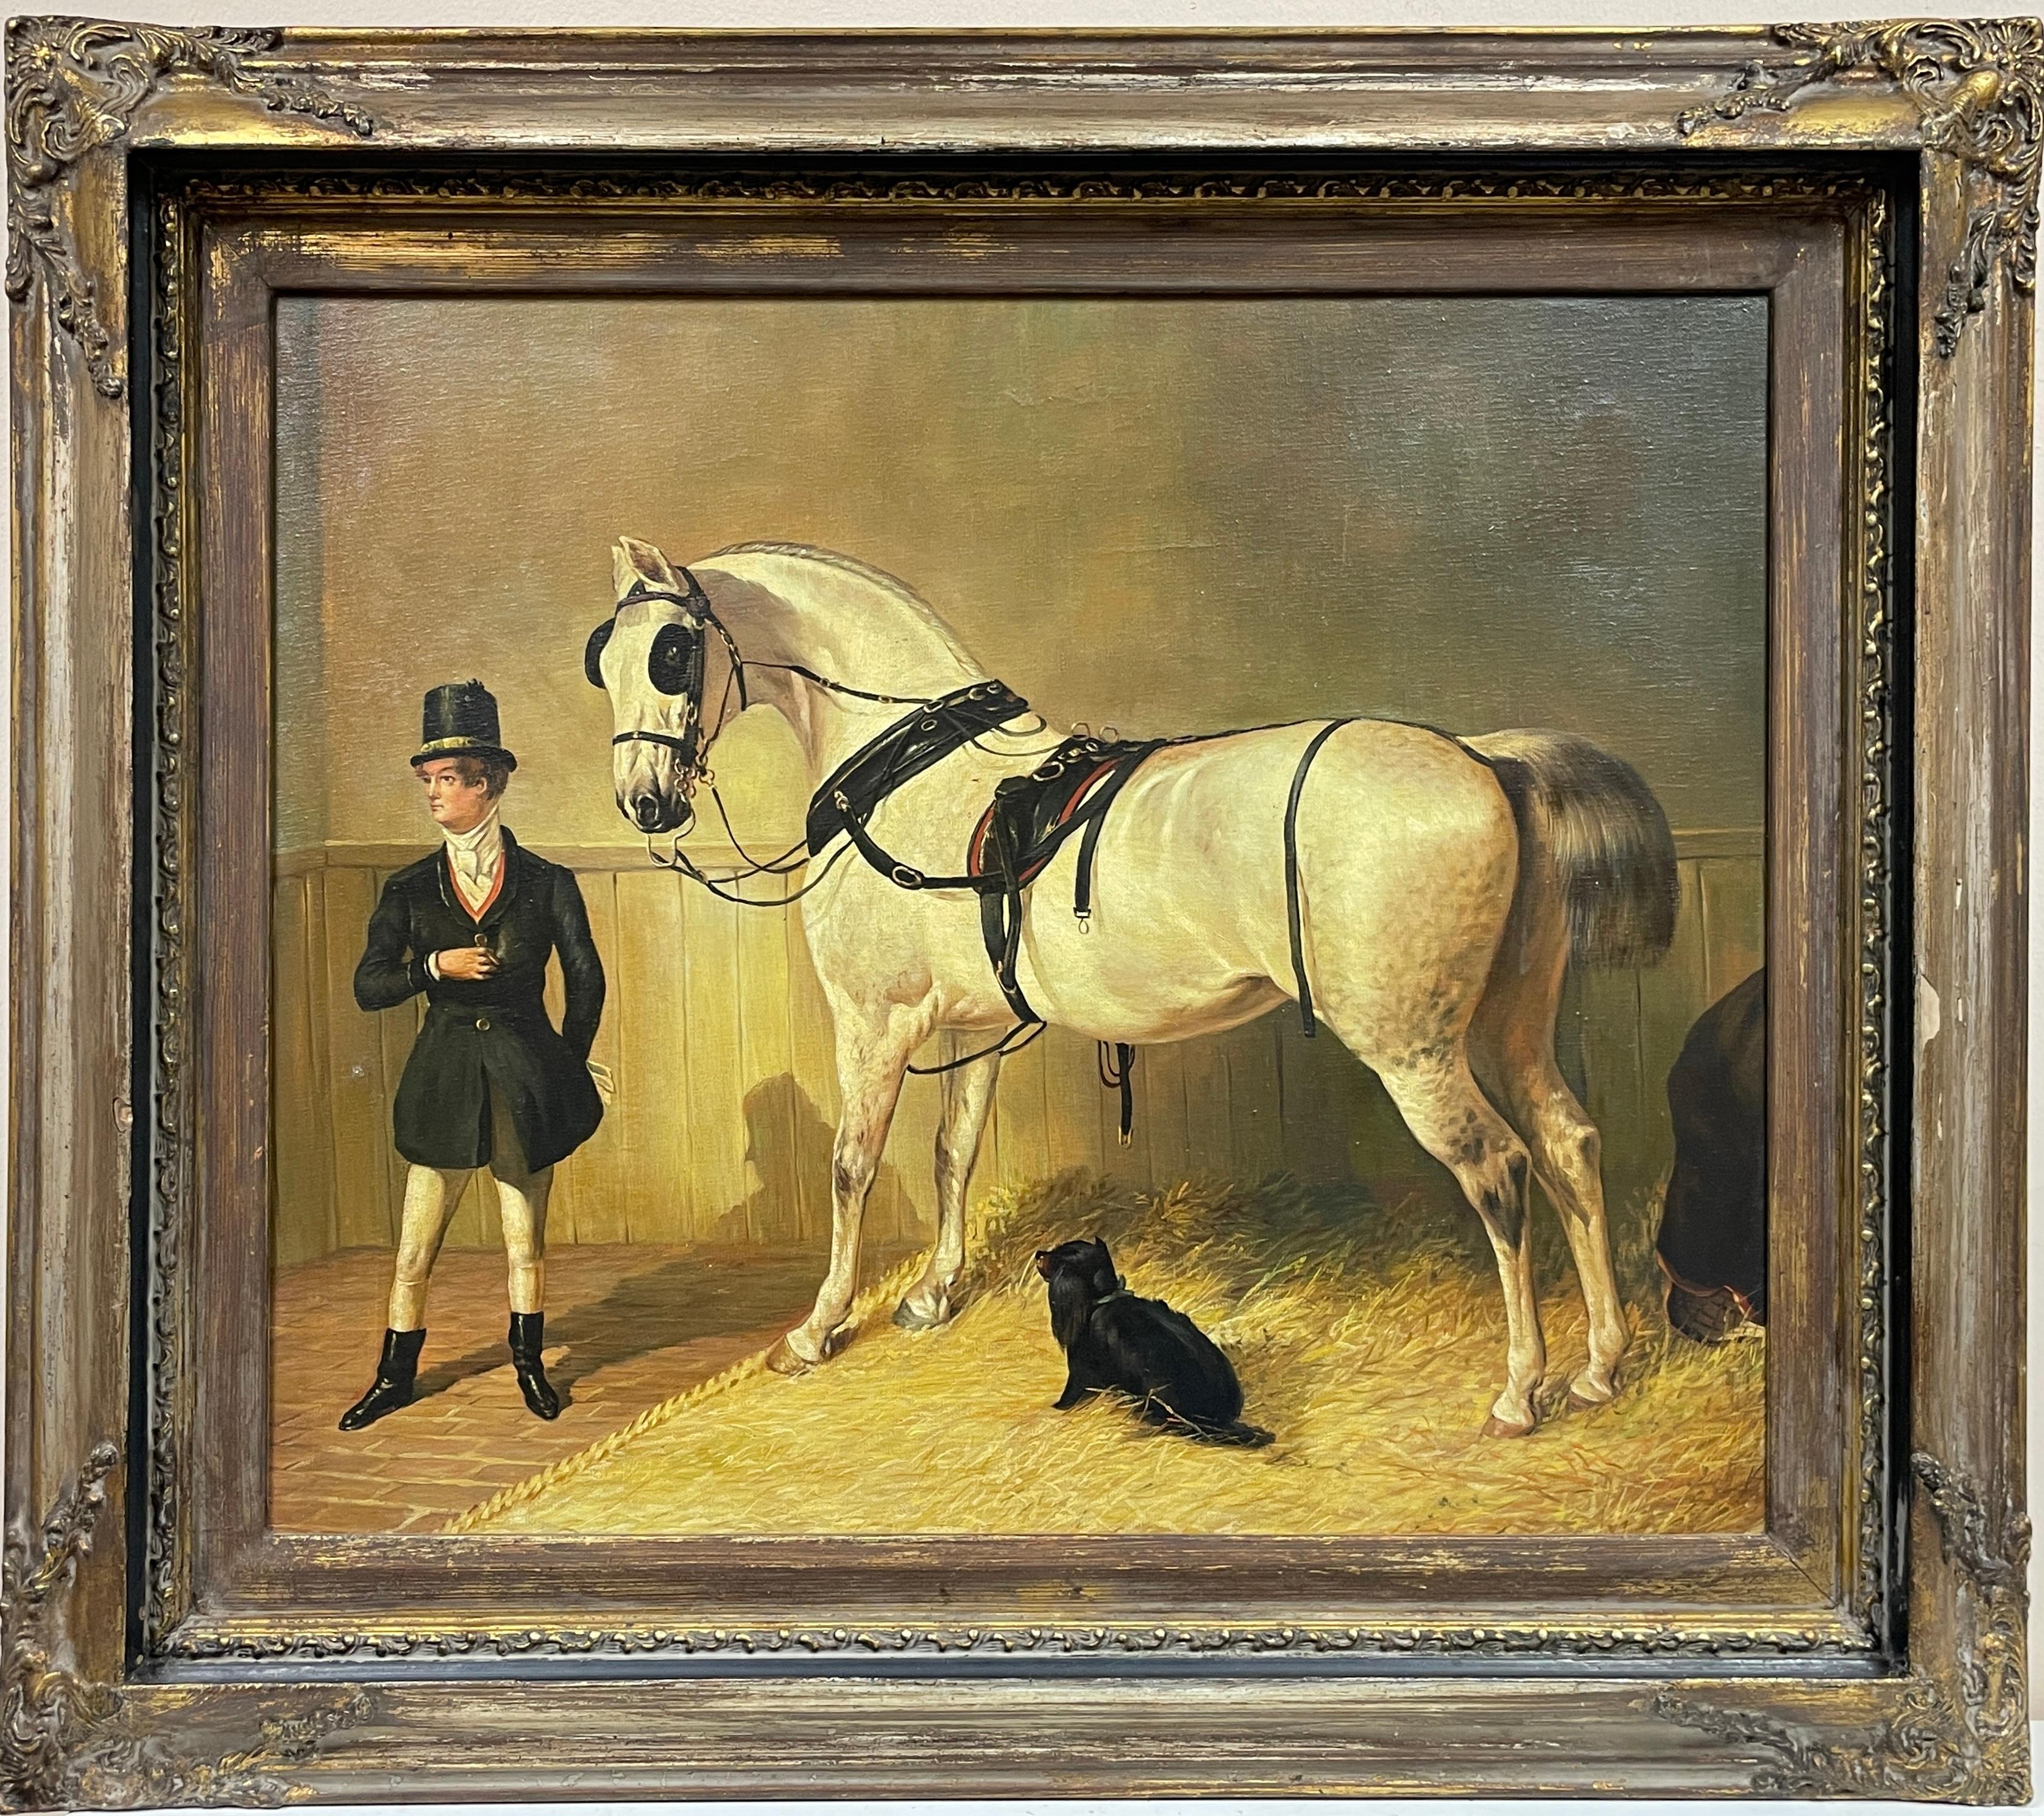 Fine Sporting Art Painting Gentleman with Horse & Dog in Stable Interior